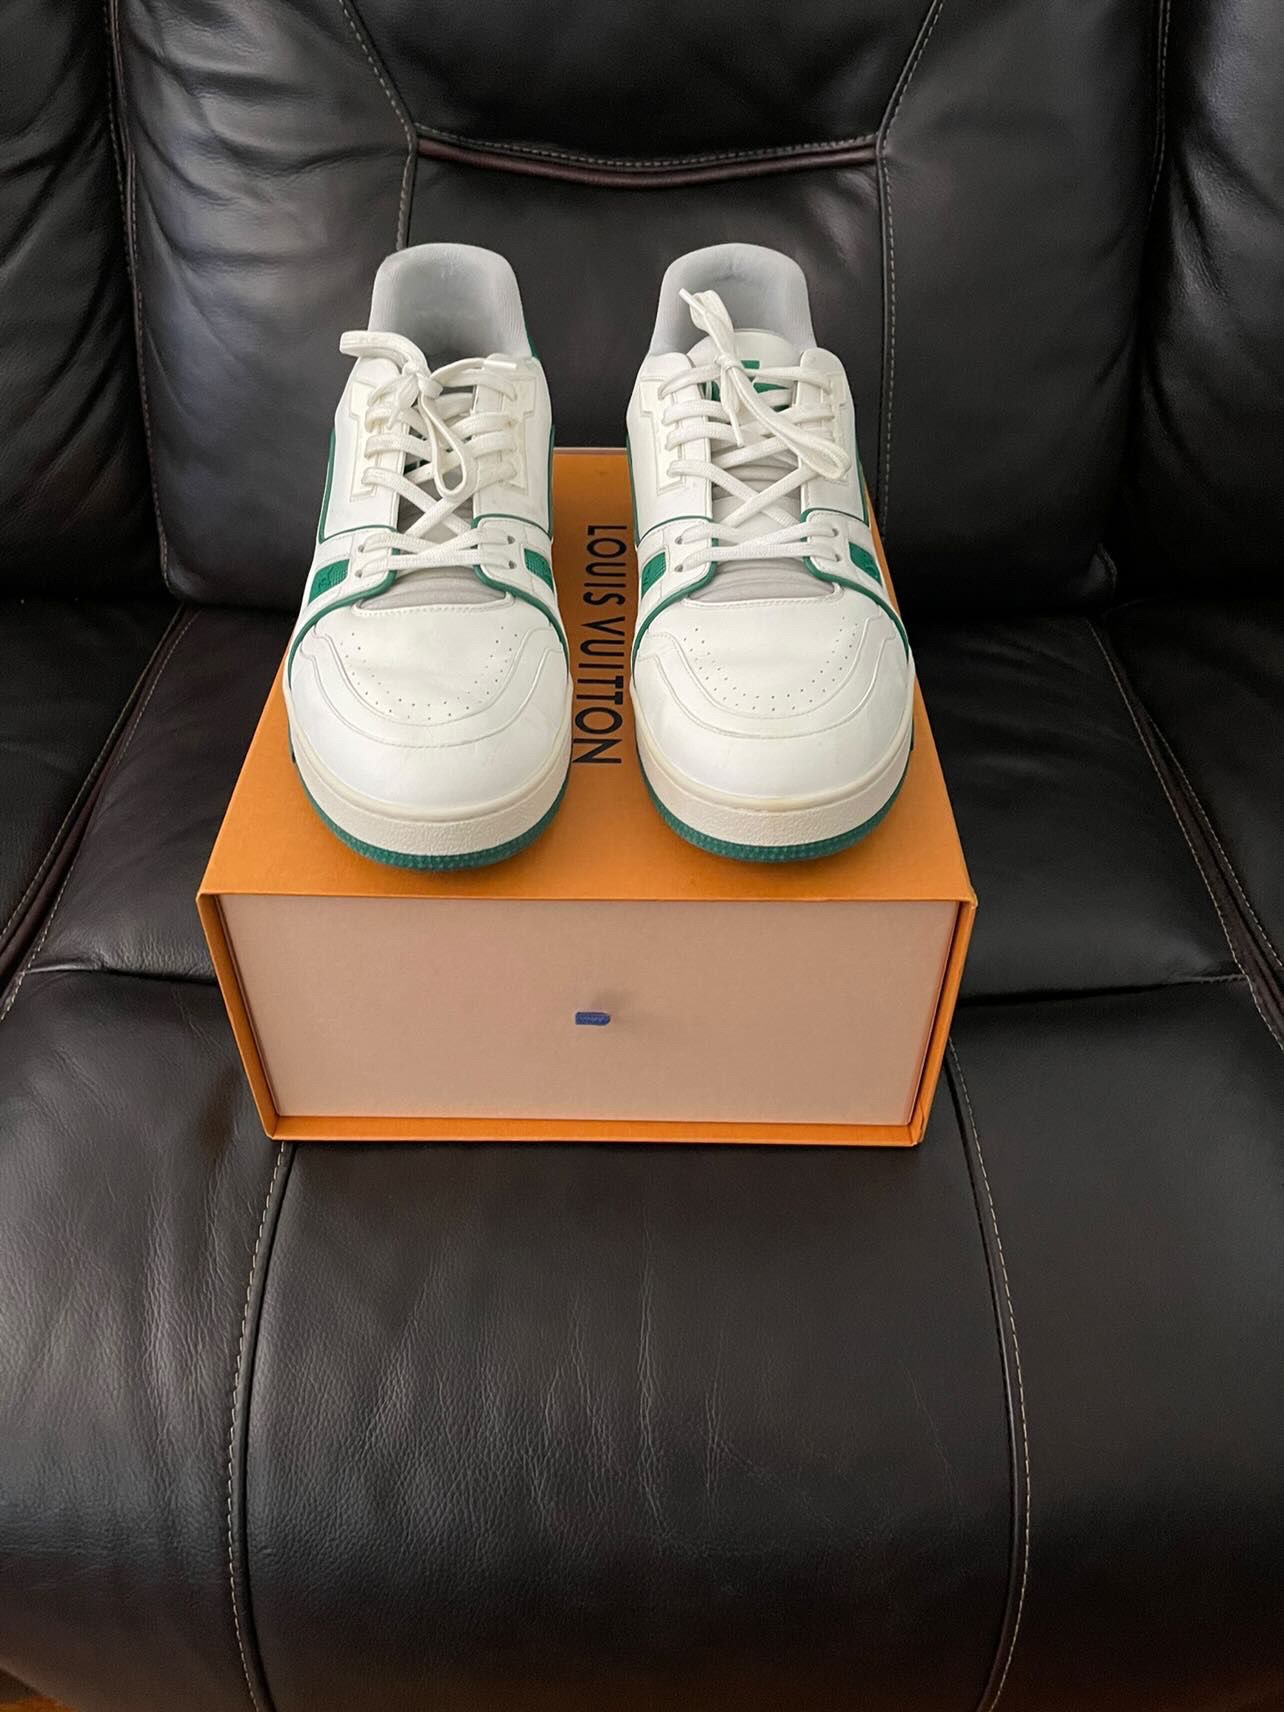 LOUIS VUITTON TRAINER GREEN for Sale in Queens, NY - OfferUp